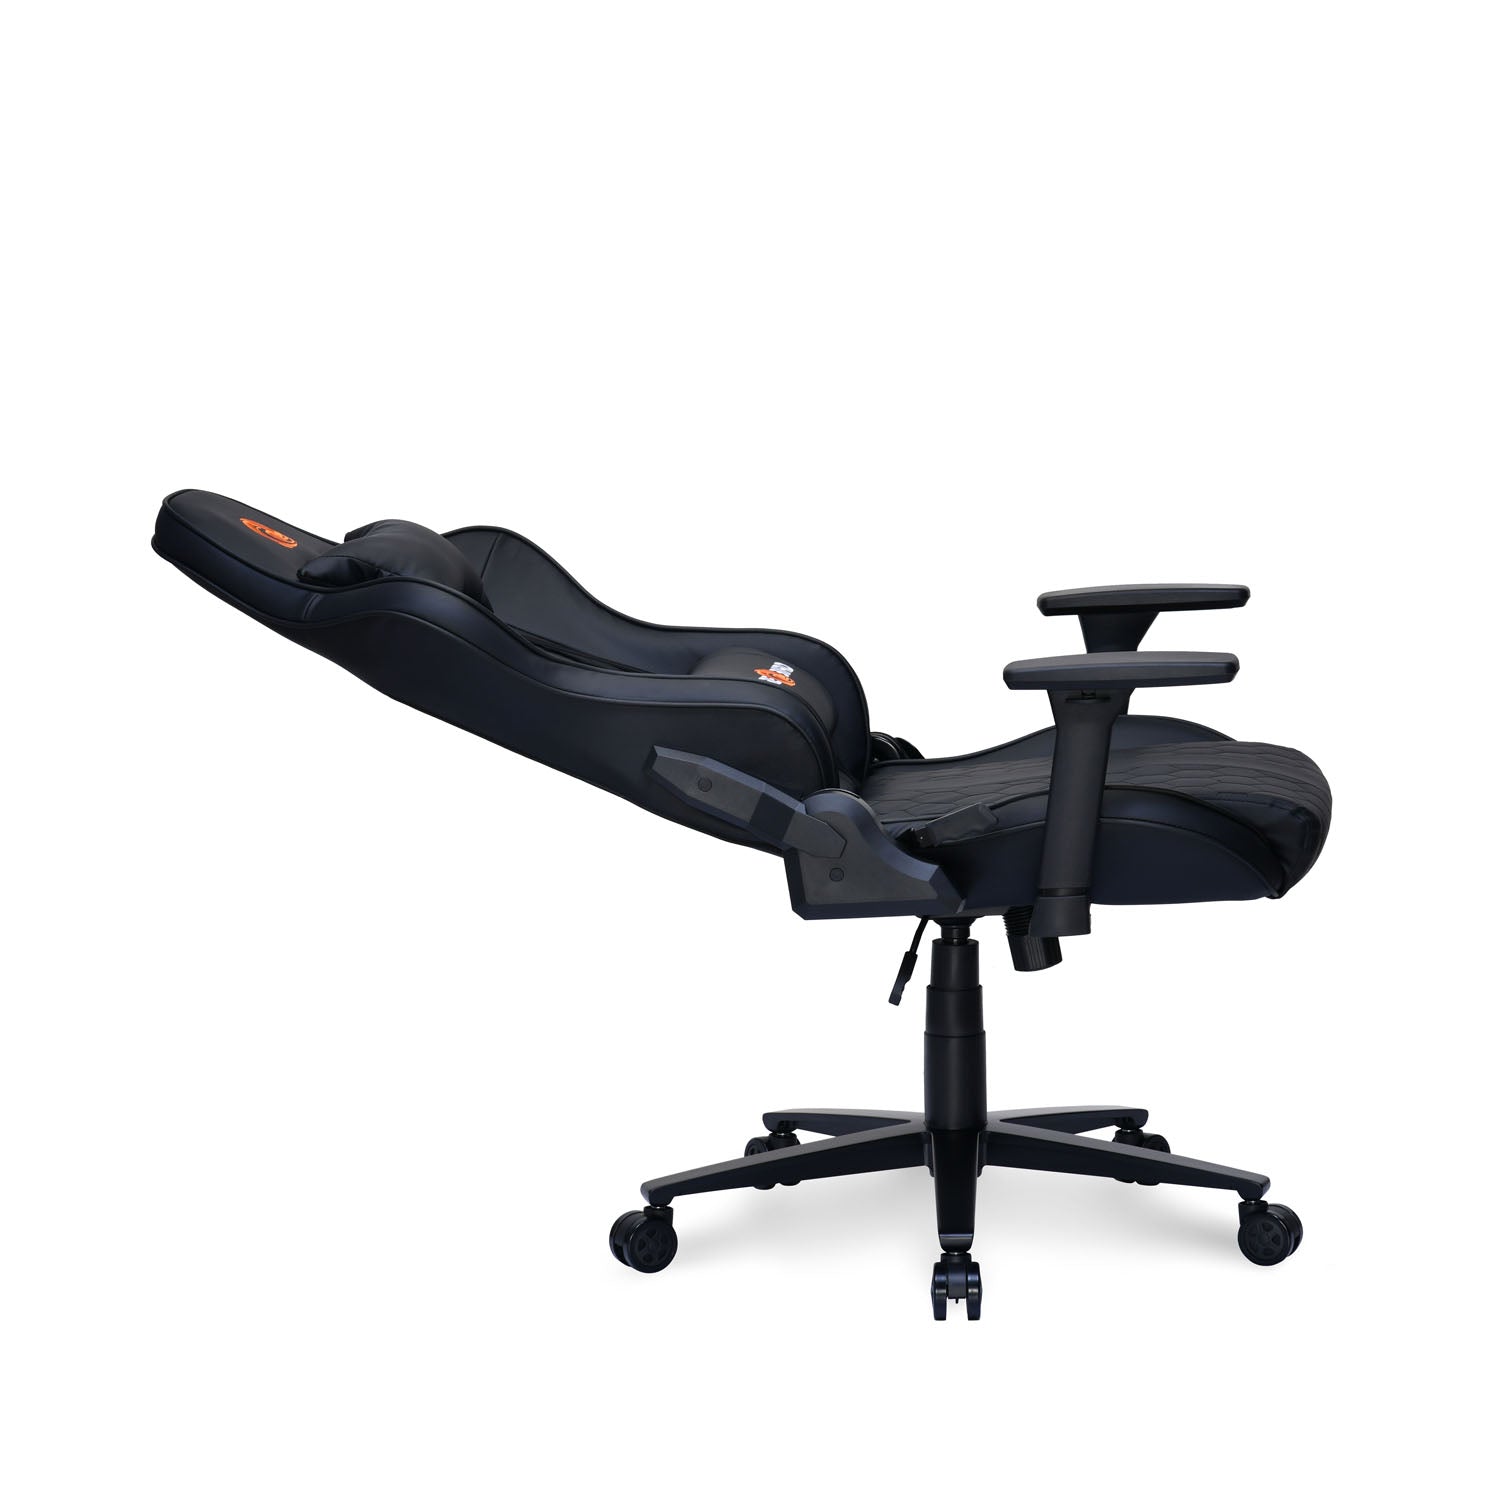 Canophy Leatherette Ergonomic Gaming Chair with Neck & Lumbar Pillow (Black)